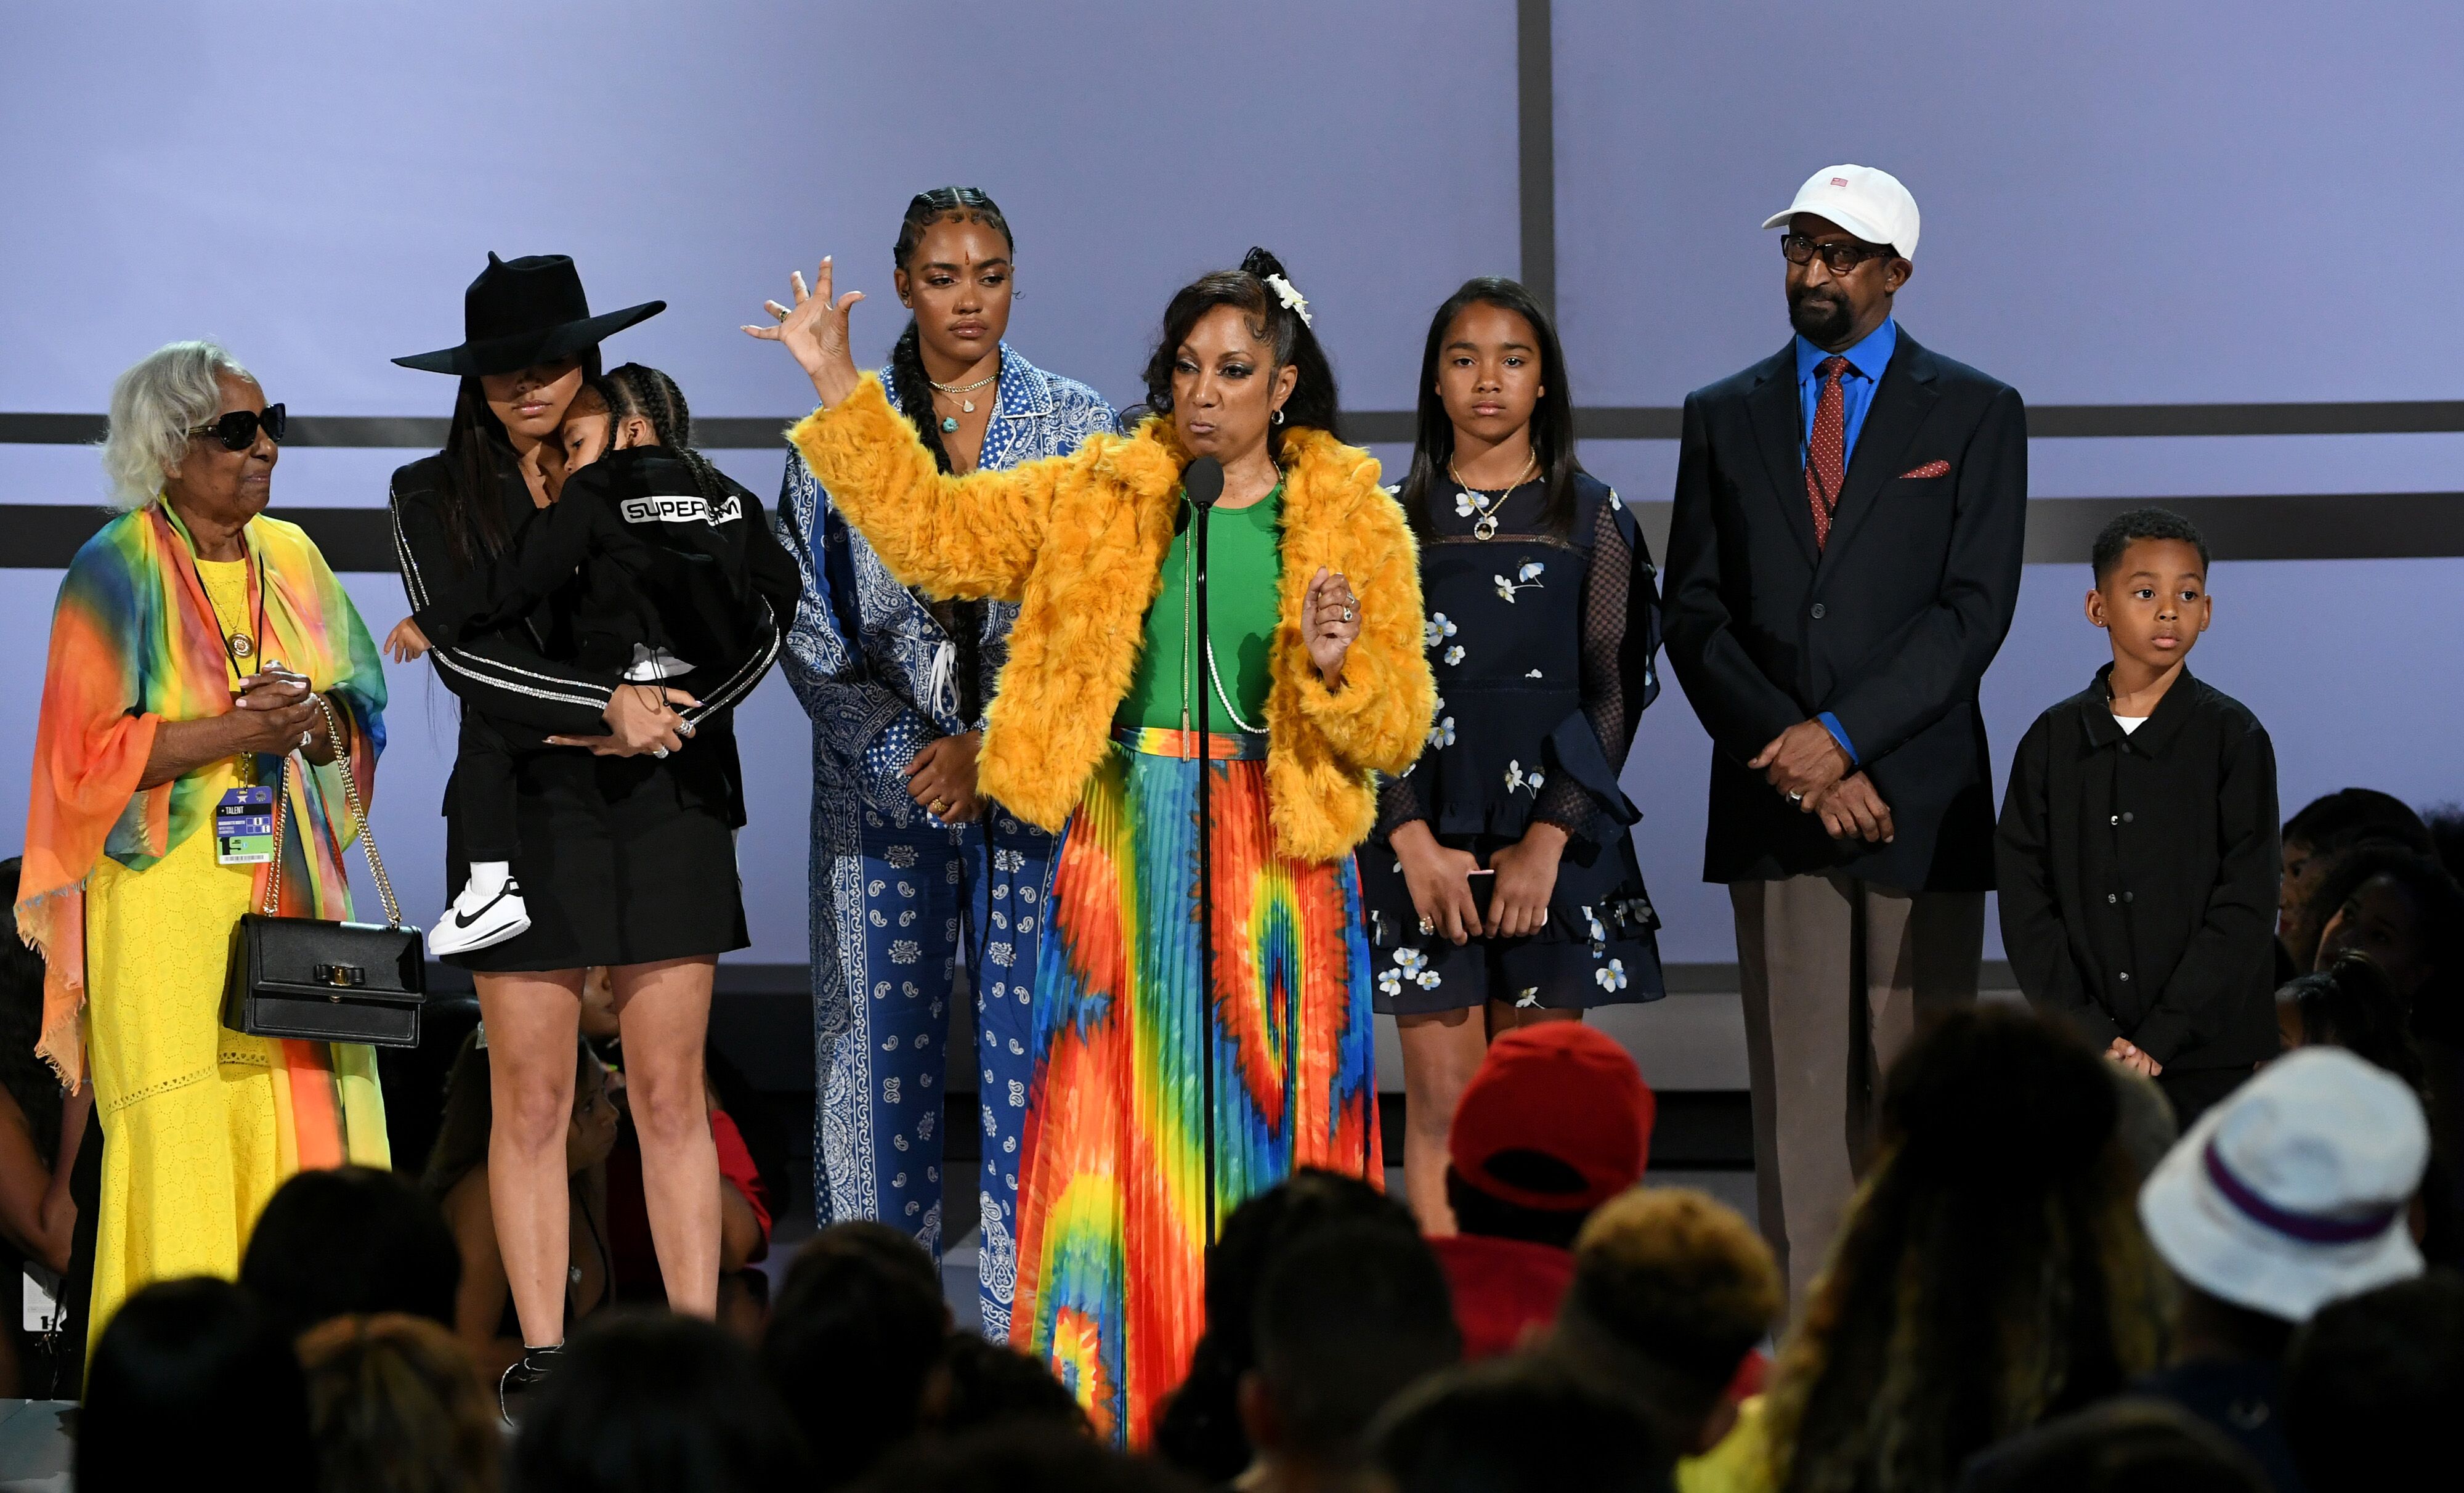 Nipsey Hussle's family during his memorial service at the staples Center | Source: Getty Images/GlobalImagesUkraine